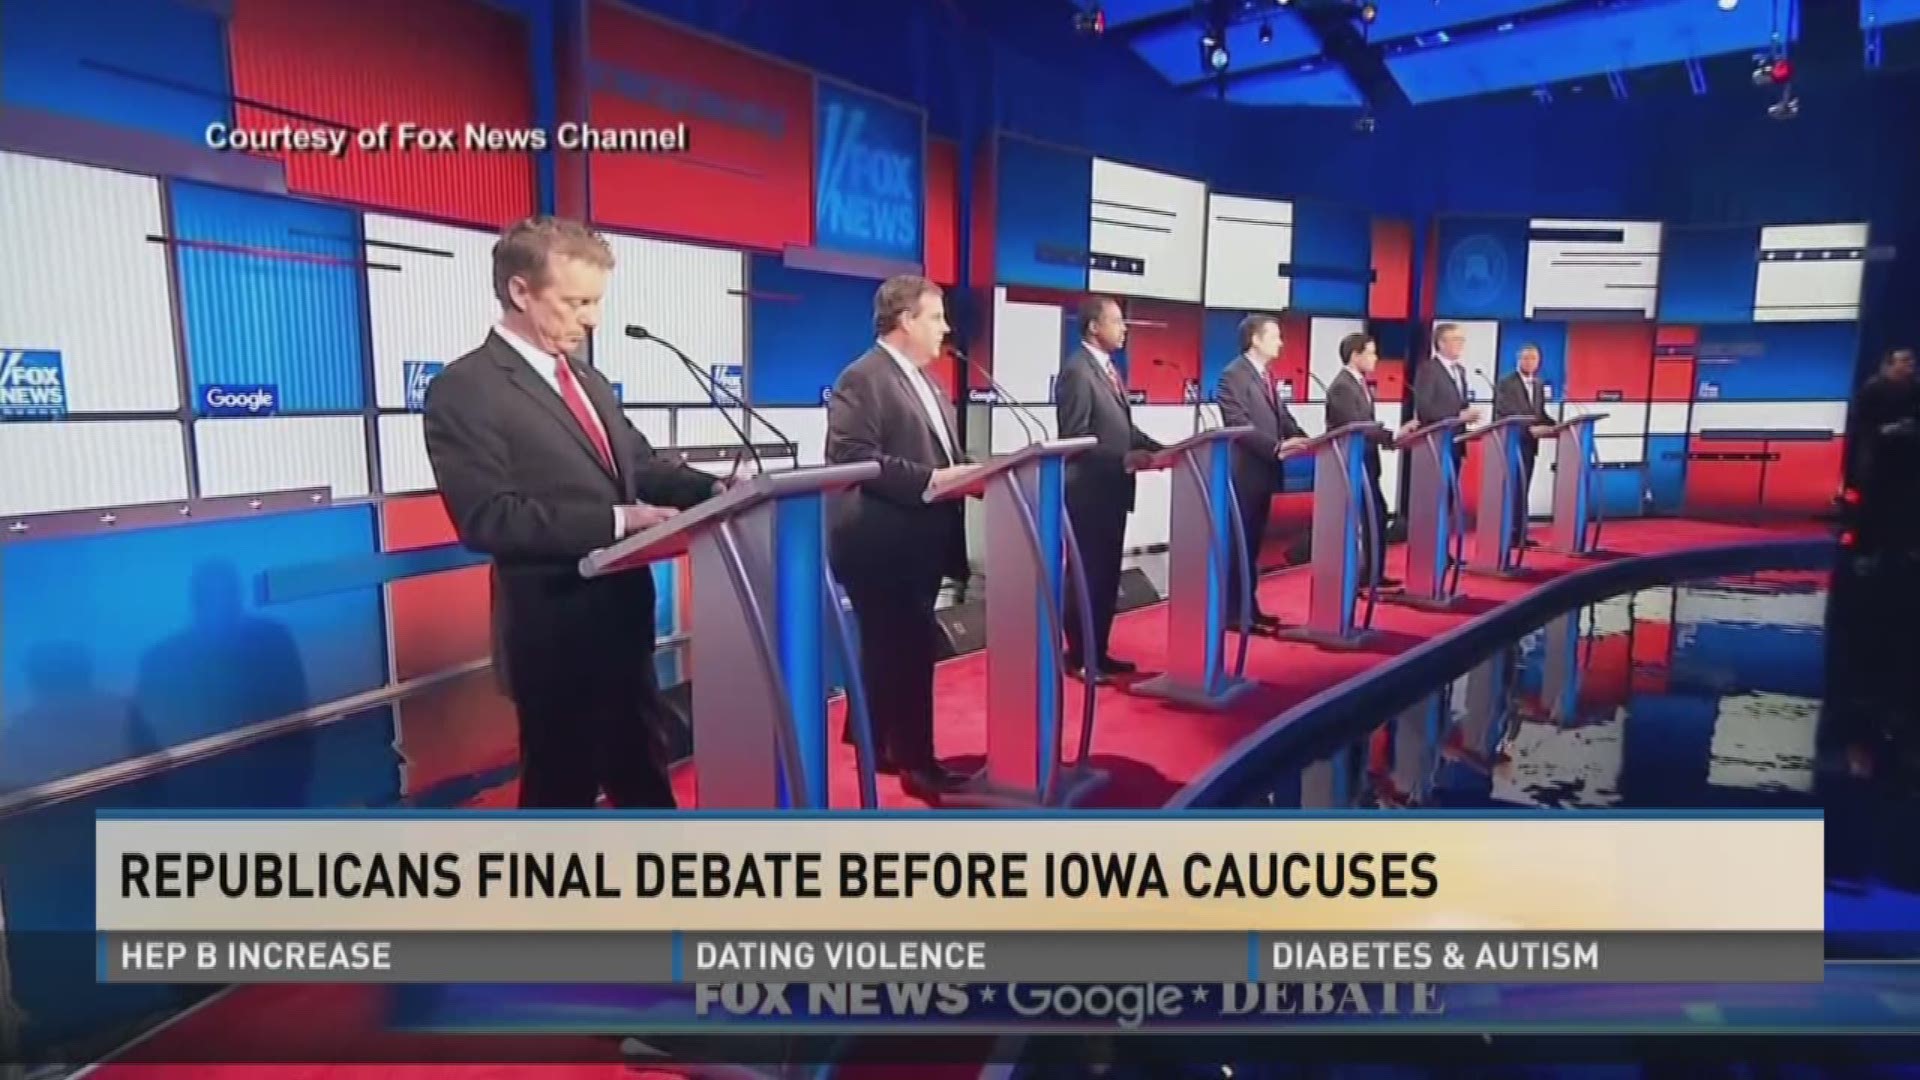 Thursday marked the final GOP debate before the Iowa caucuses on Monday.